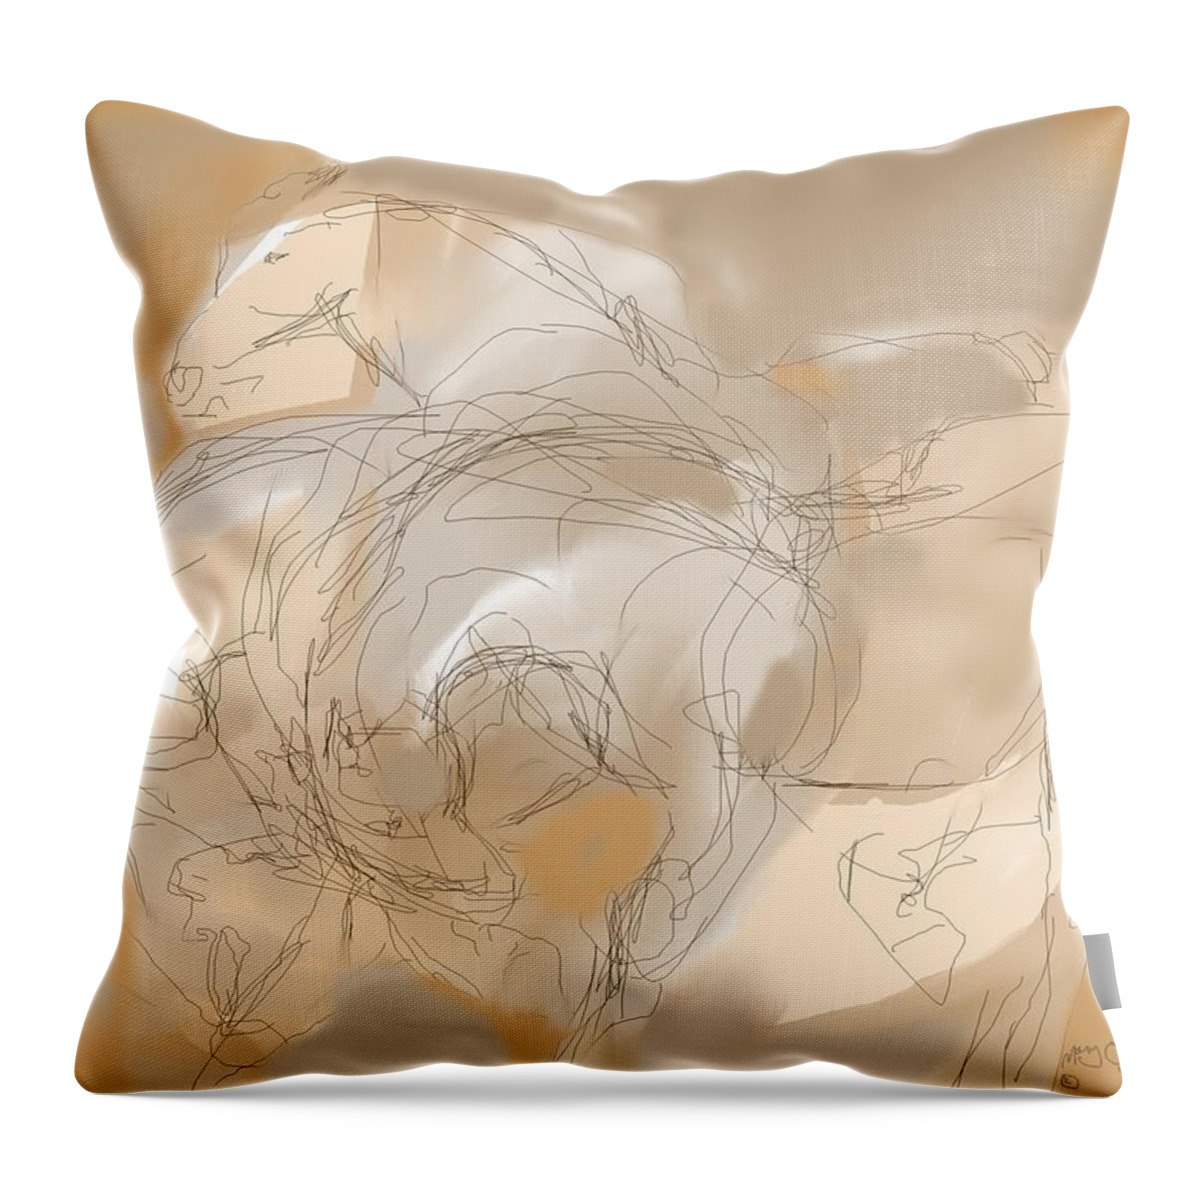 Horse Throw Pillow featuring the digital art 3 Horses by Mary Armstrong